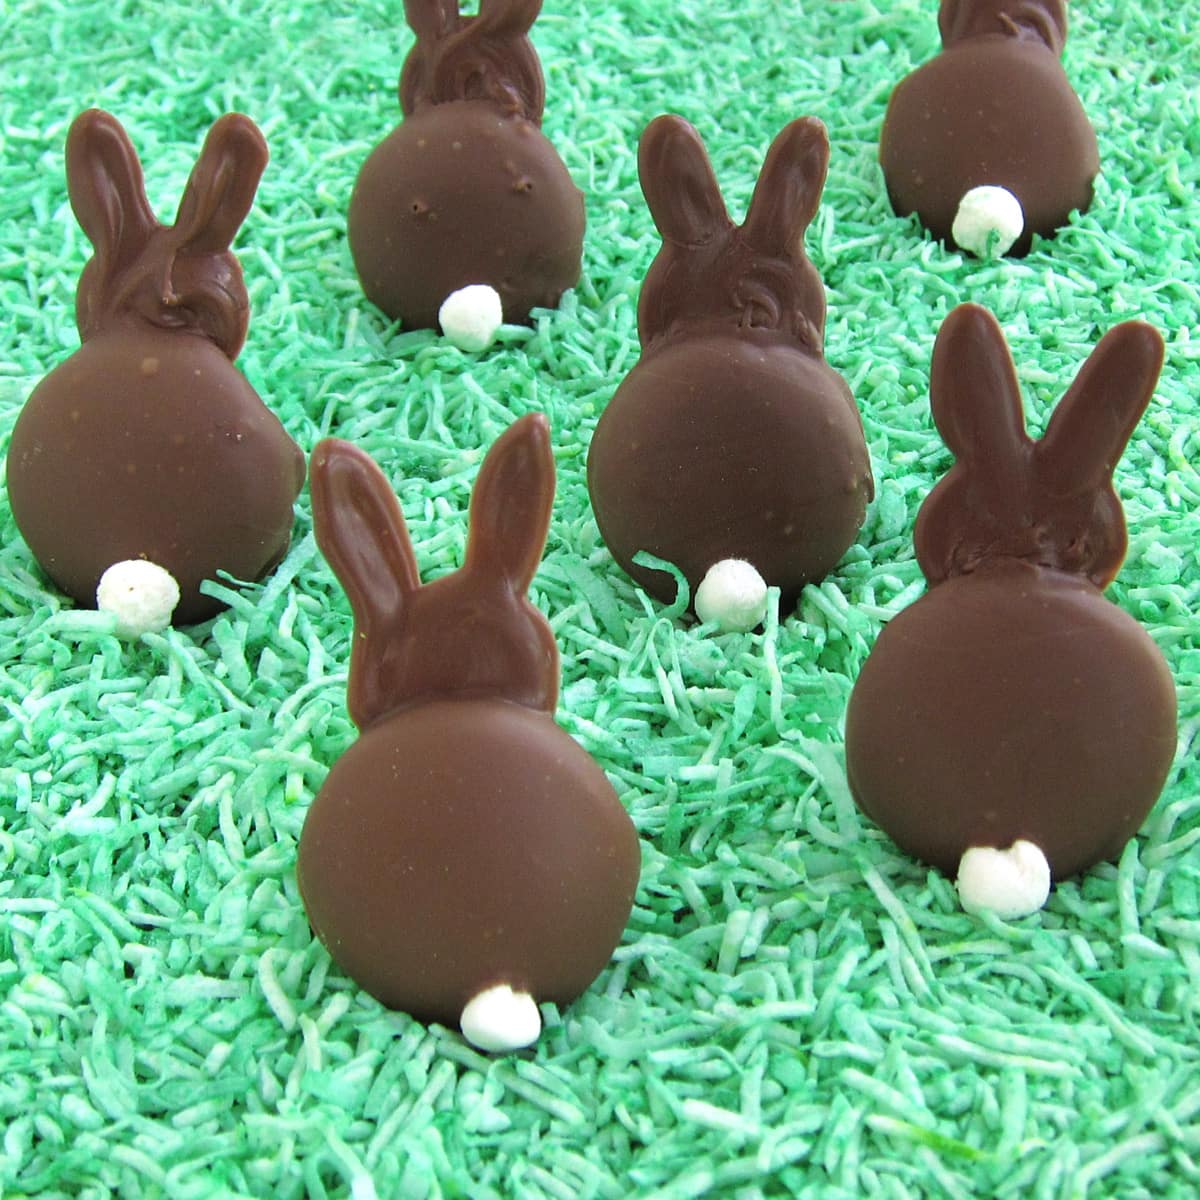 chocolate bunny cookies made with chocolate-dipped vanilla wafers and mini marshmallow tails all sitting in green coconut grass.